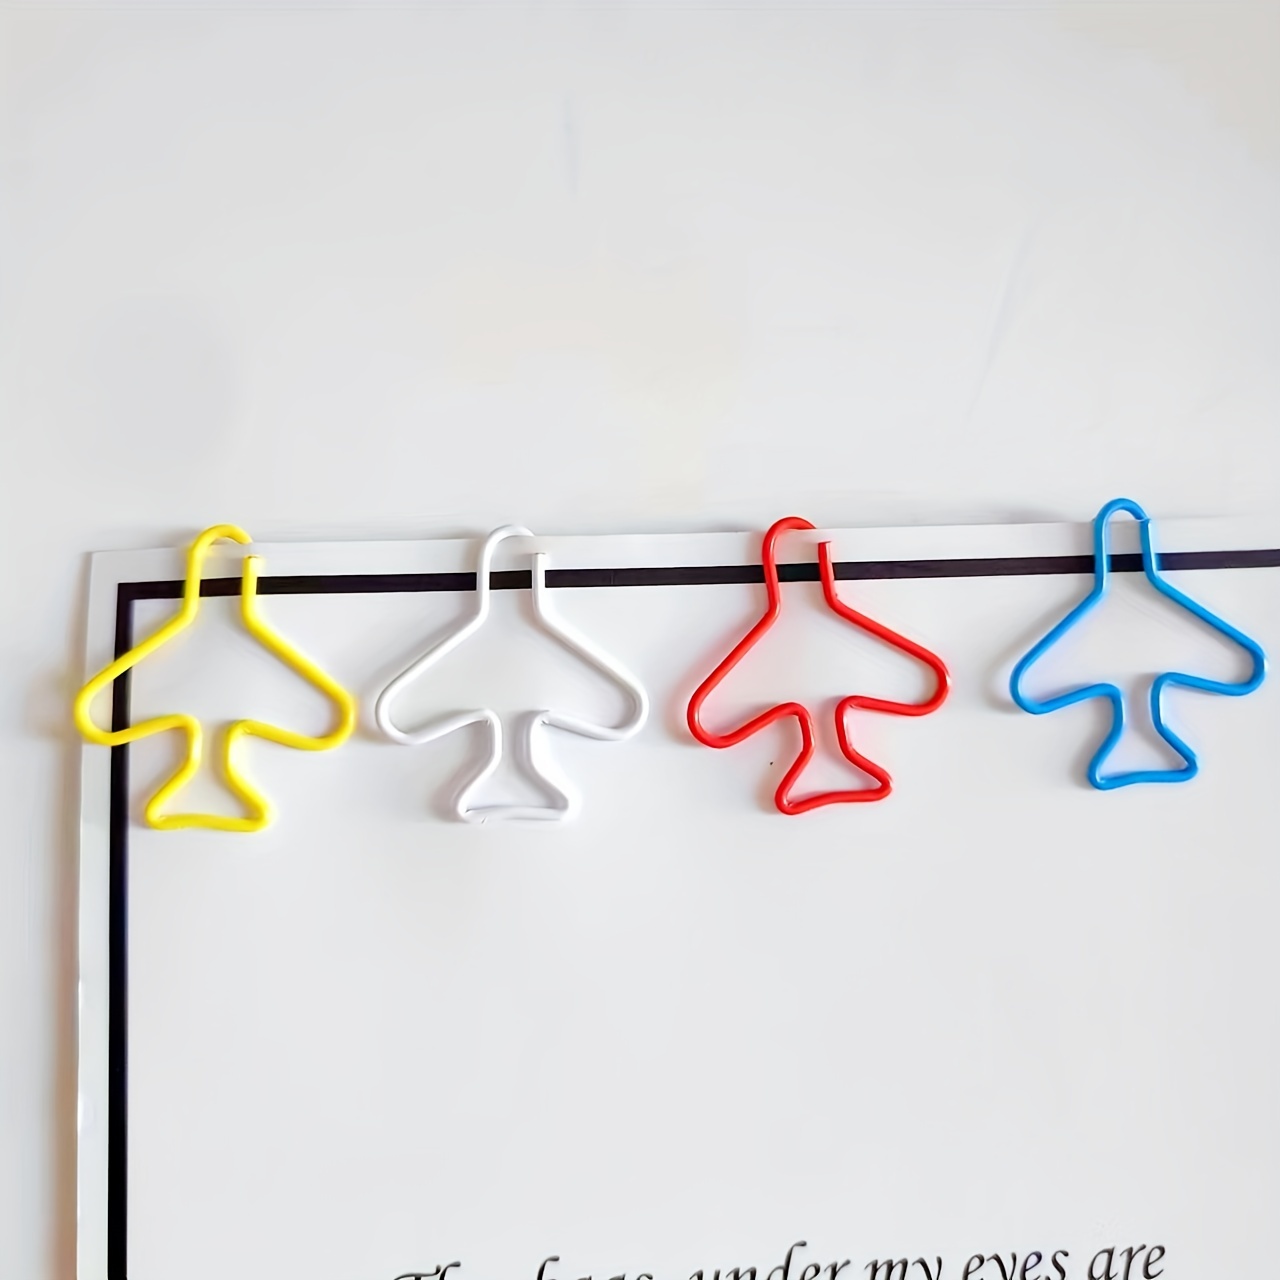 Airplane Shaped Paper Clips, Metal Decorative Planner